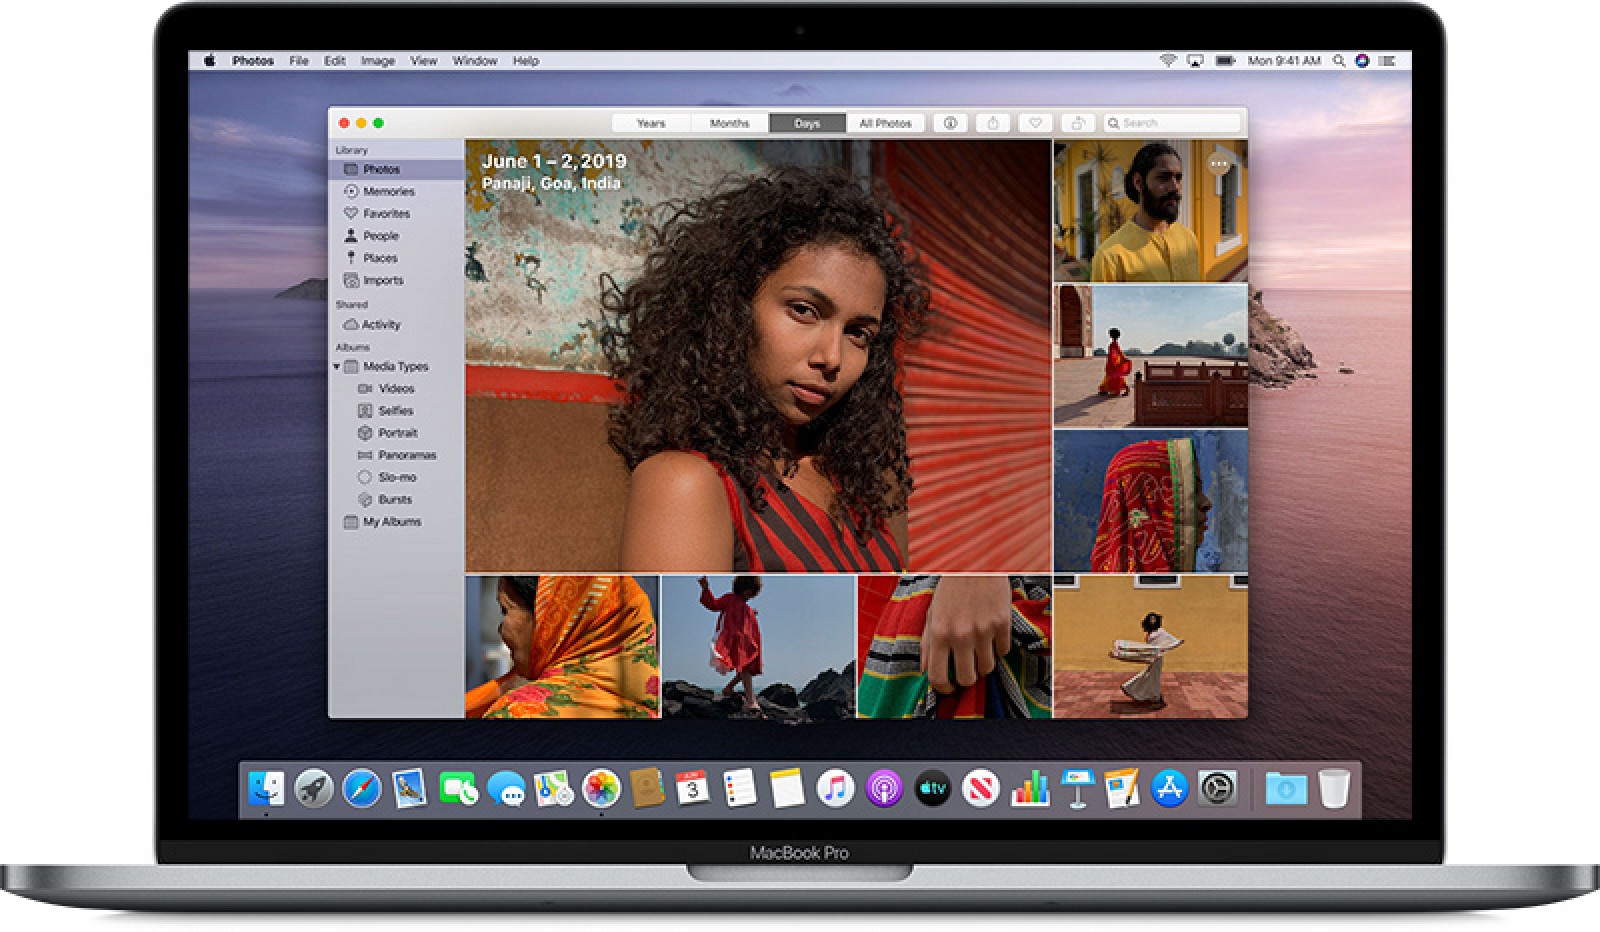 macbook video editing software on itunes